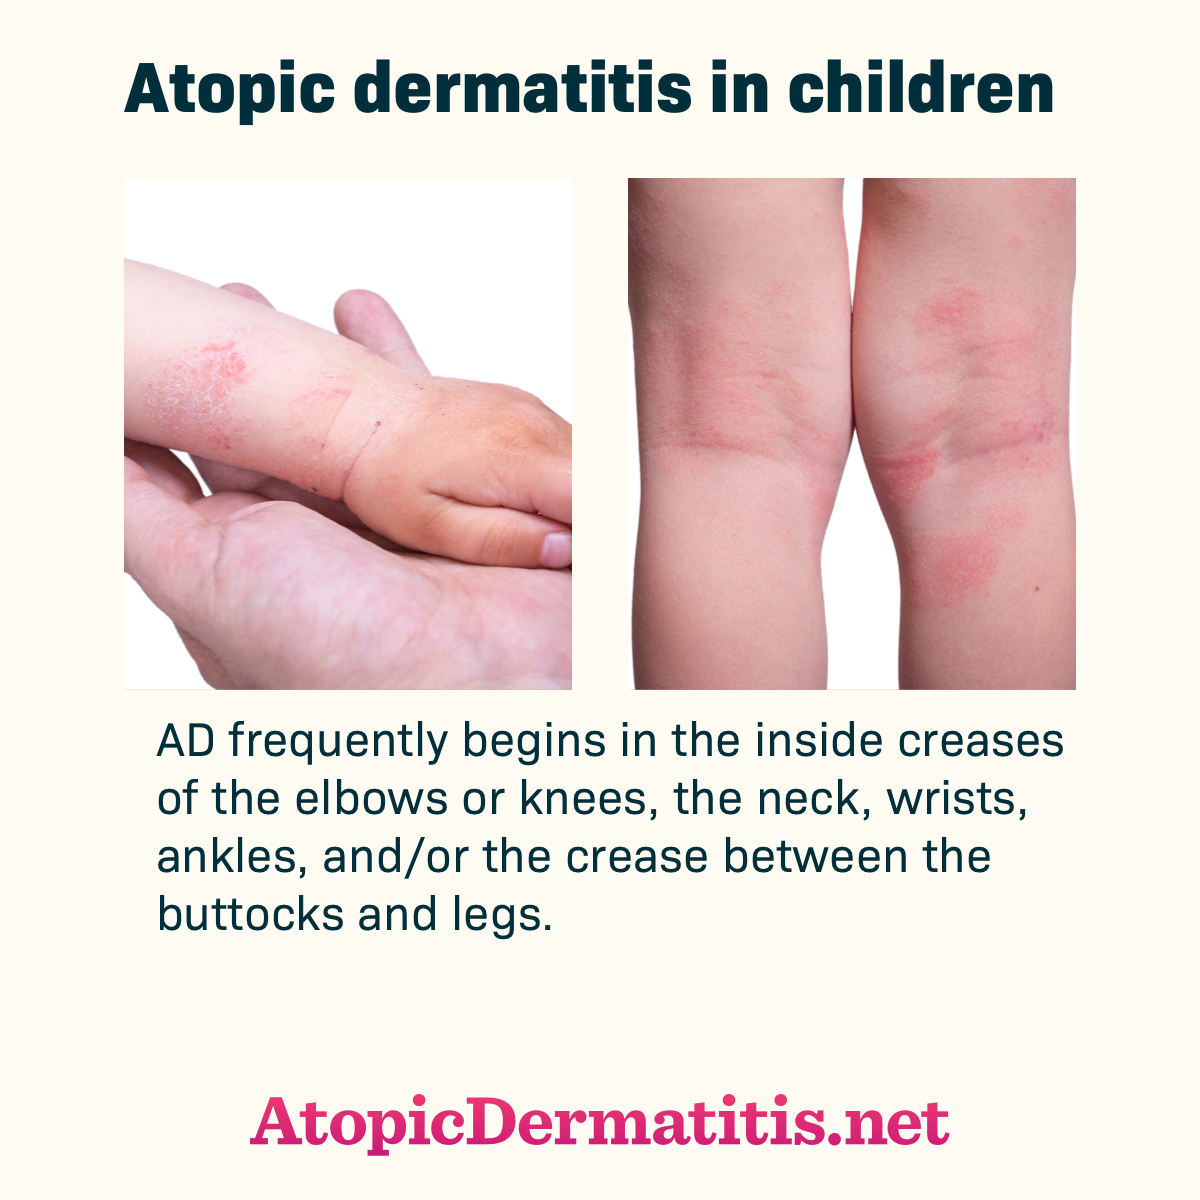 Child with atopic dermatitis rash on arm and on the back of the knees